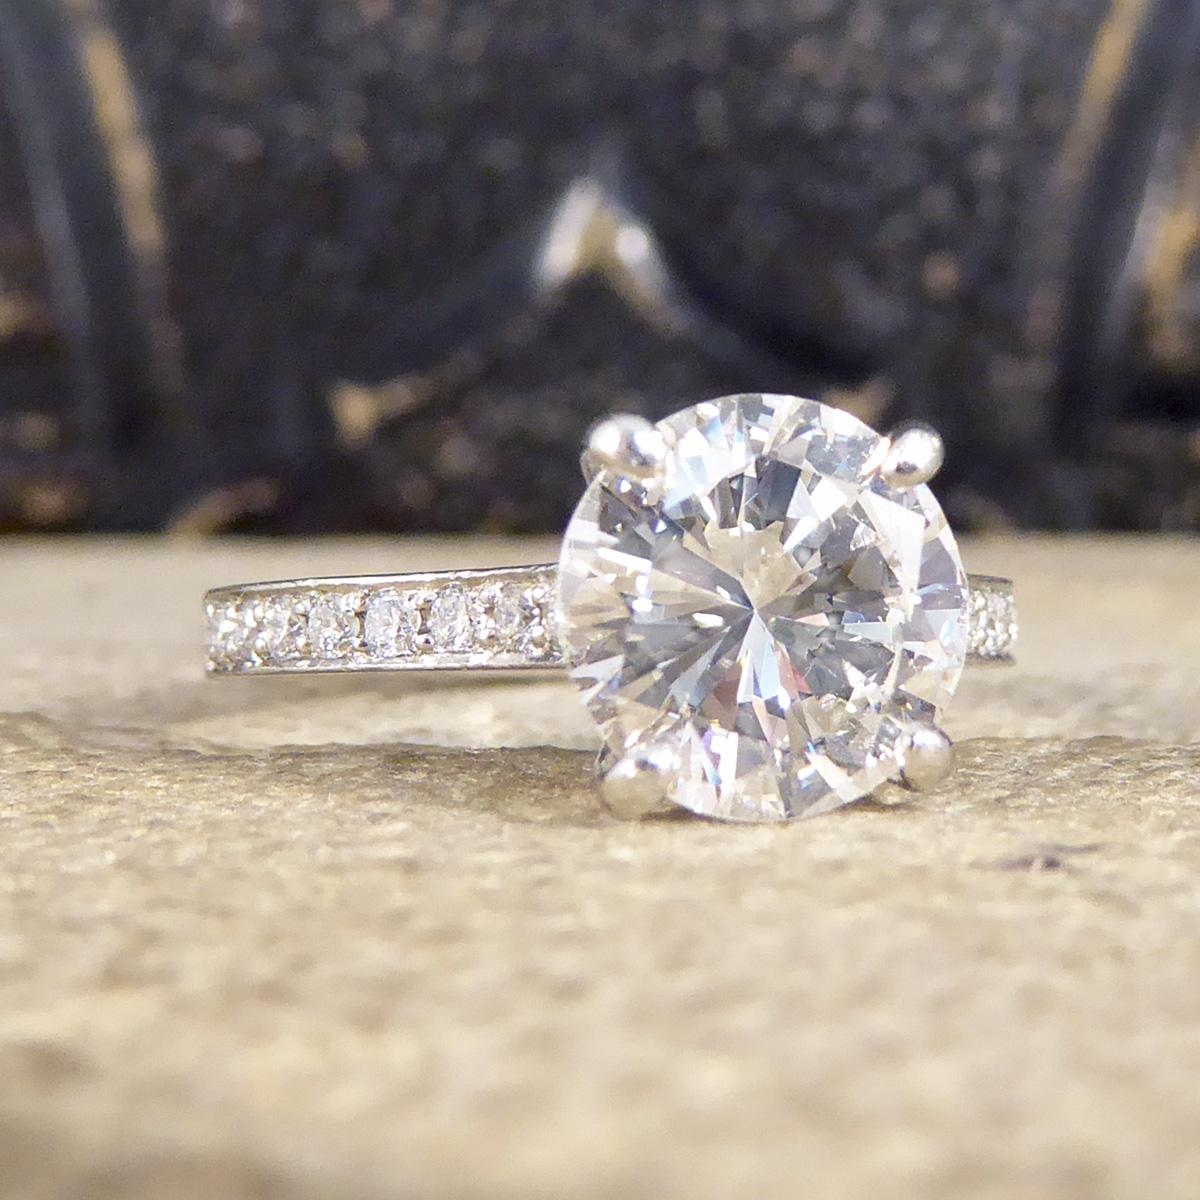 This beautifully sparkly engagement ring holds clear and bright Round Brilliant Cut Diamond weighing 1.91ct in a four claw setting. The centre Diamond itself has a high clarity grading of VVS2 showing the quality of the stone. A classic solitaire